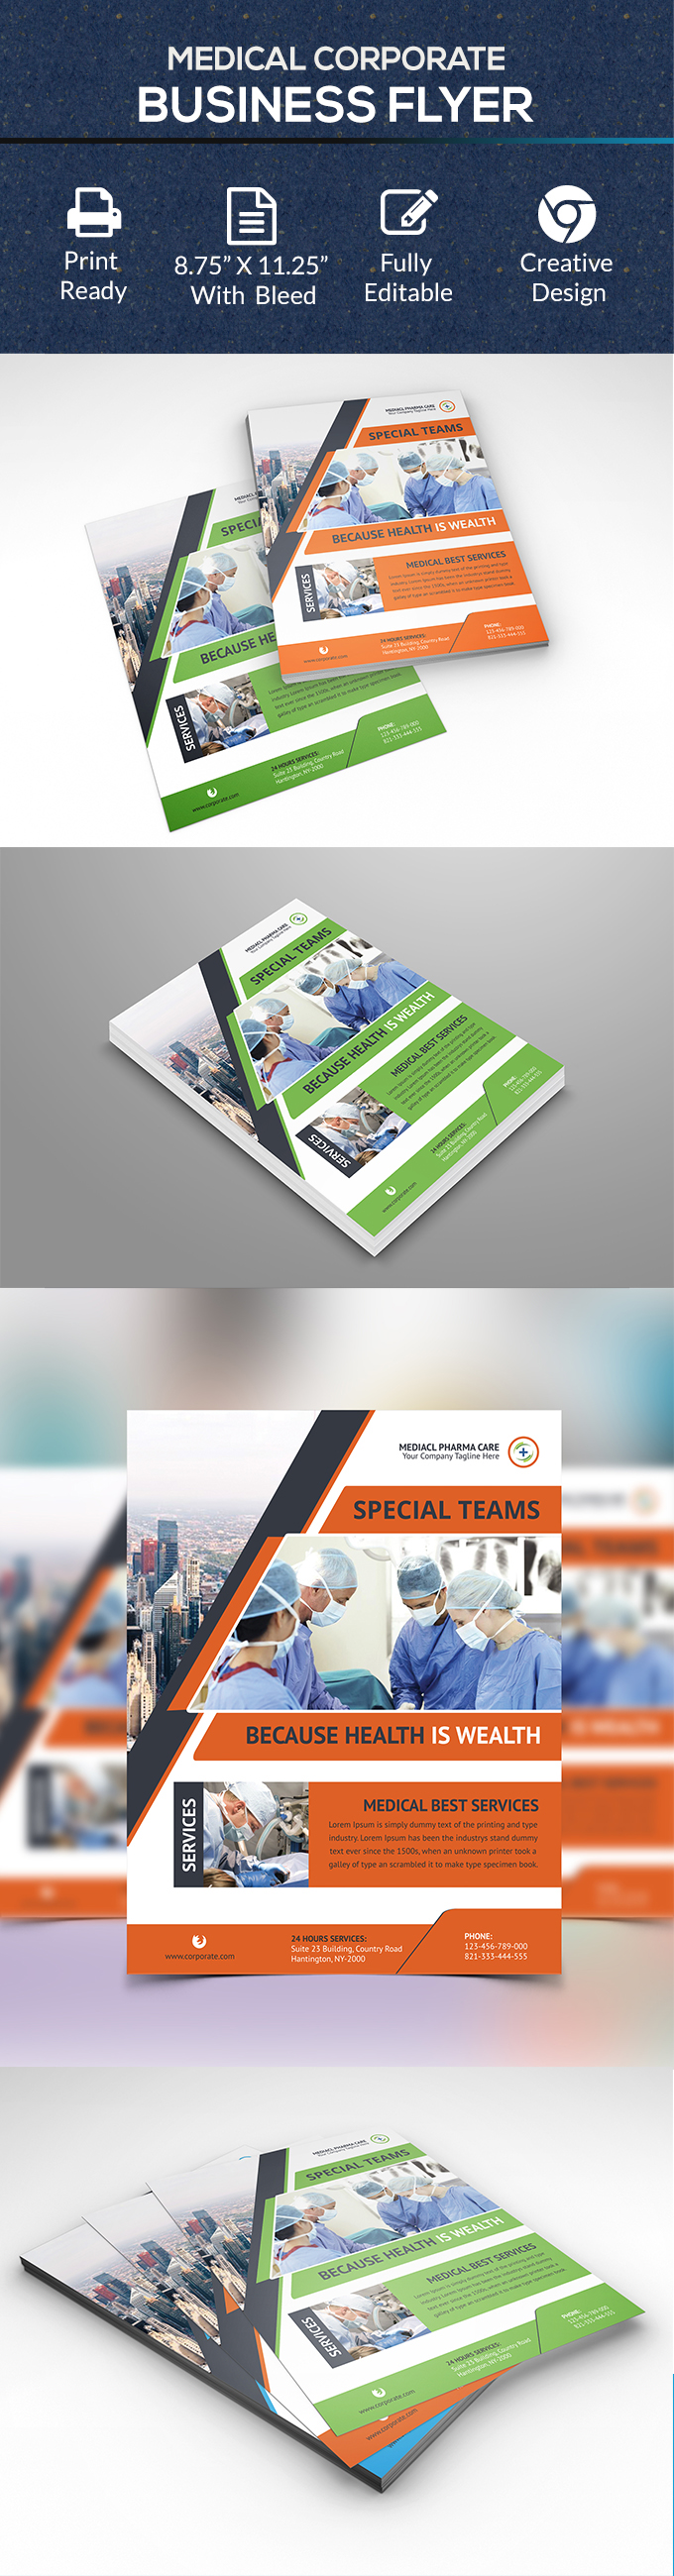 Beautiful brand clean design CMYK color cool corporate corporate flyer medical